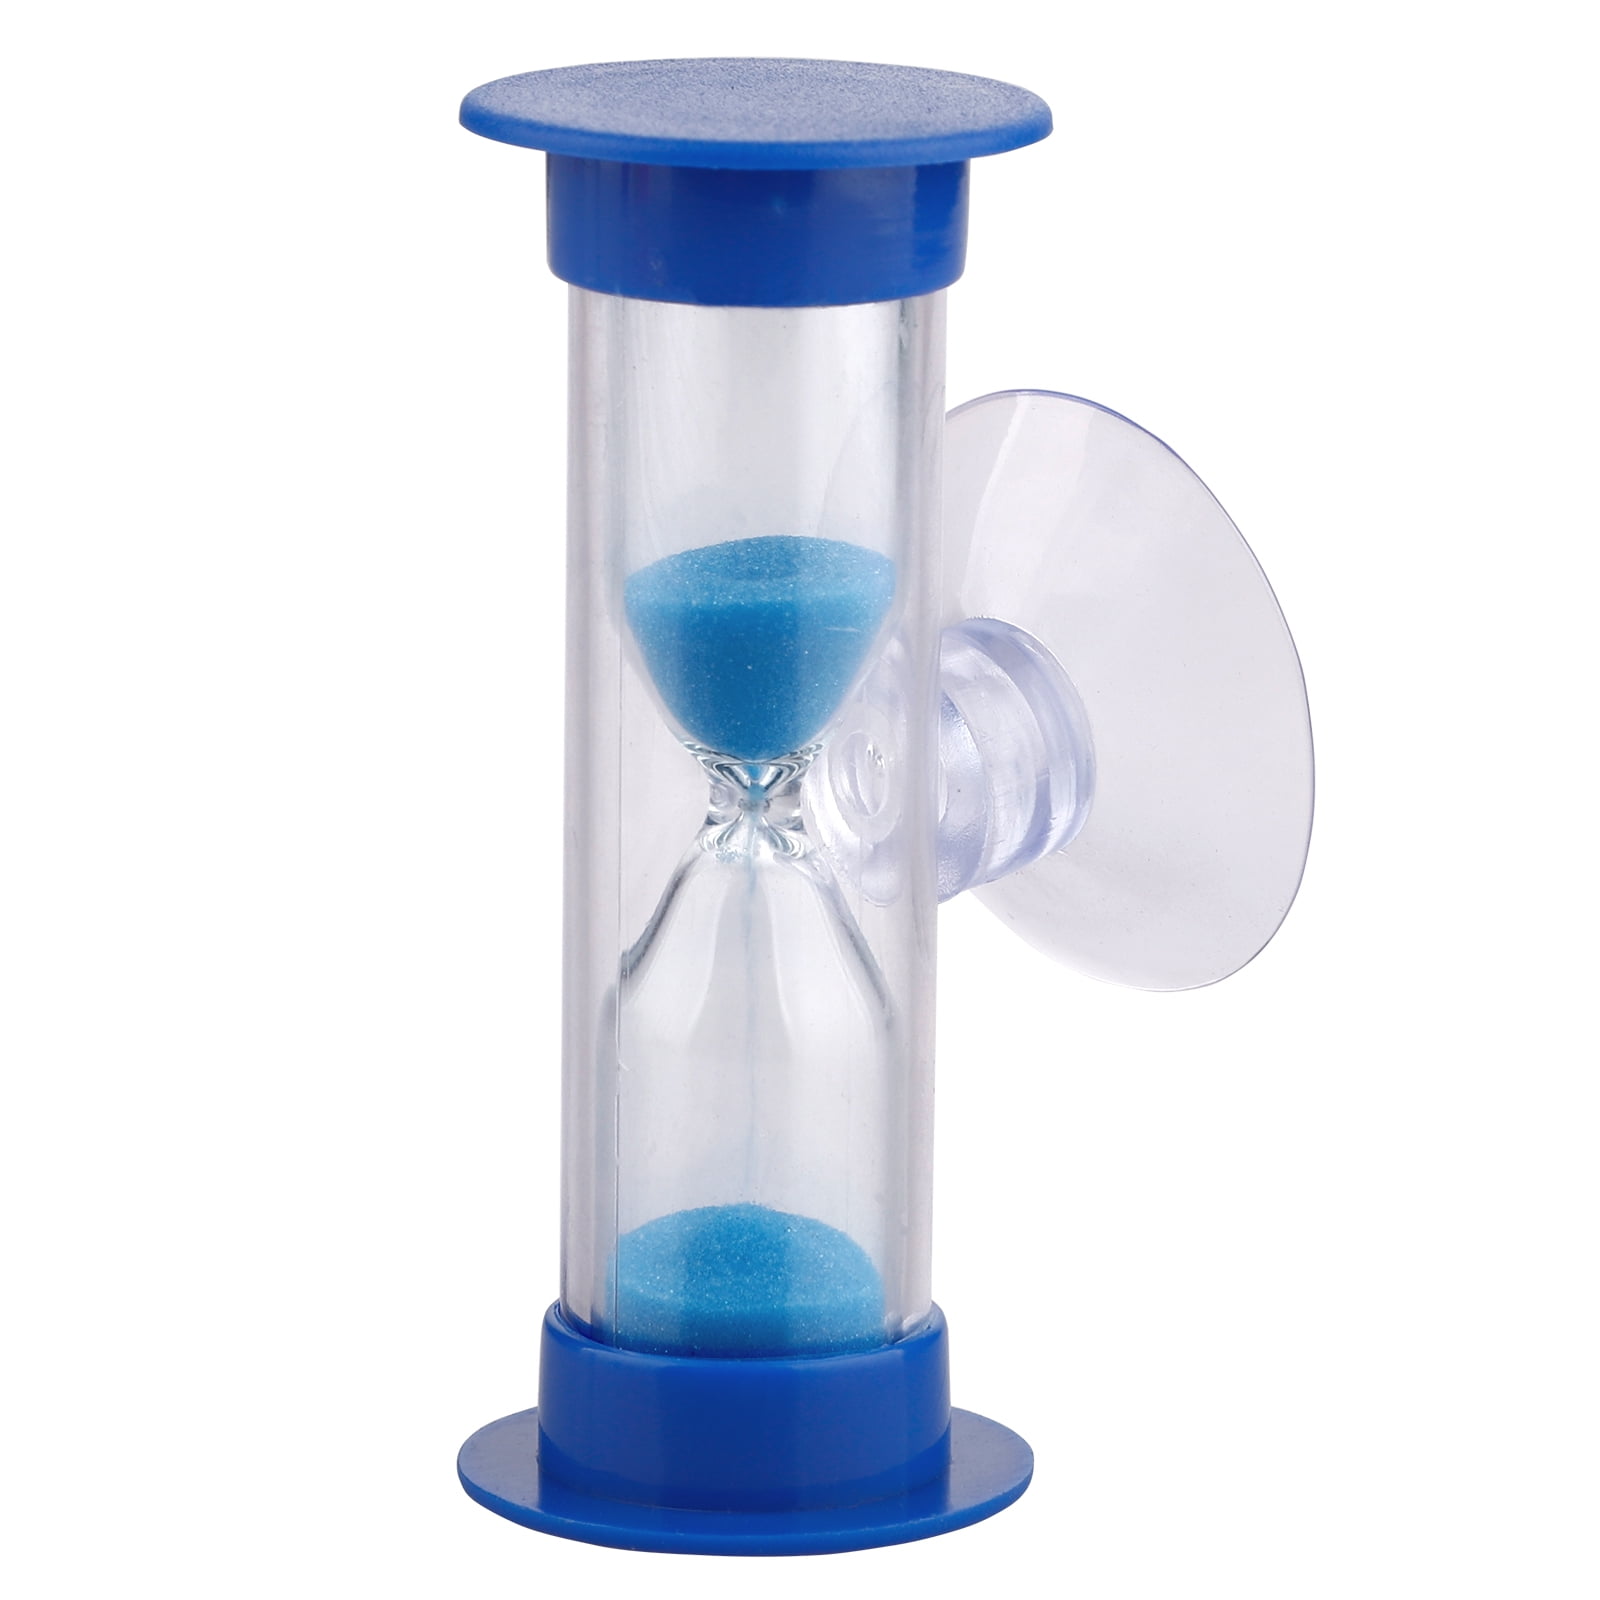 Details about   Norpro 3 Minute Timer Hourglass Egg Game Timer Natural Wood Base With Glass 1473 